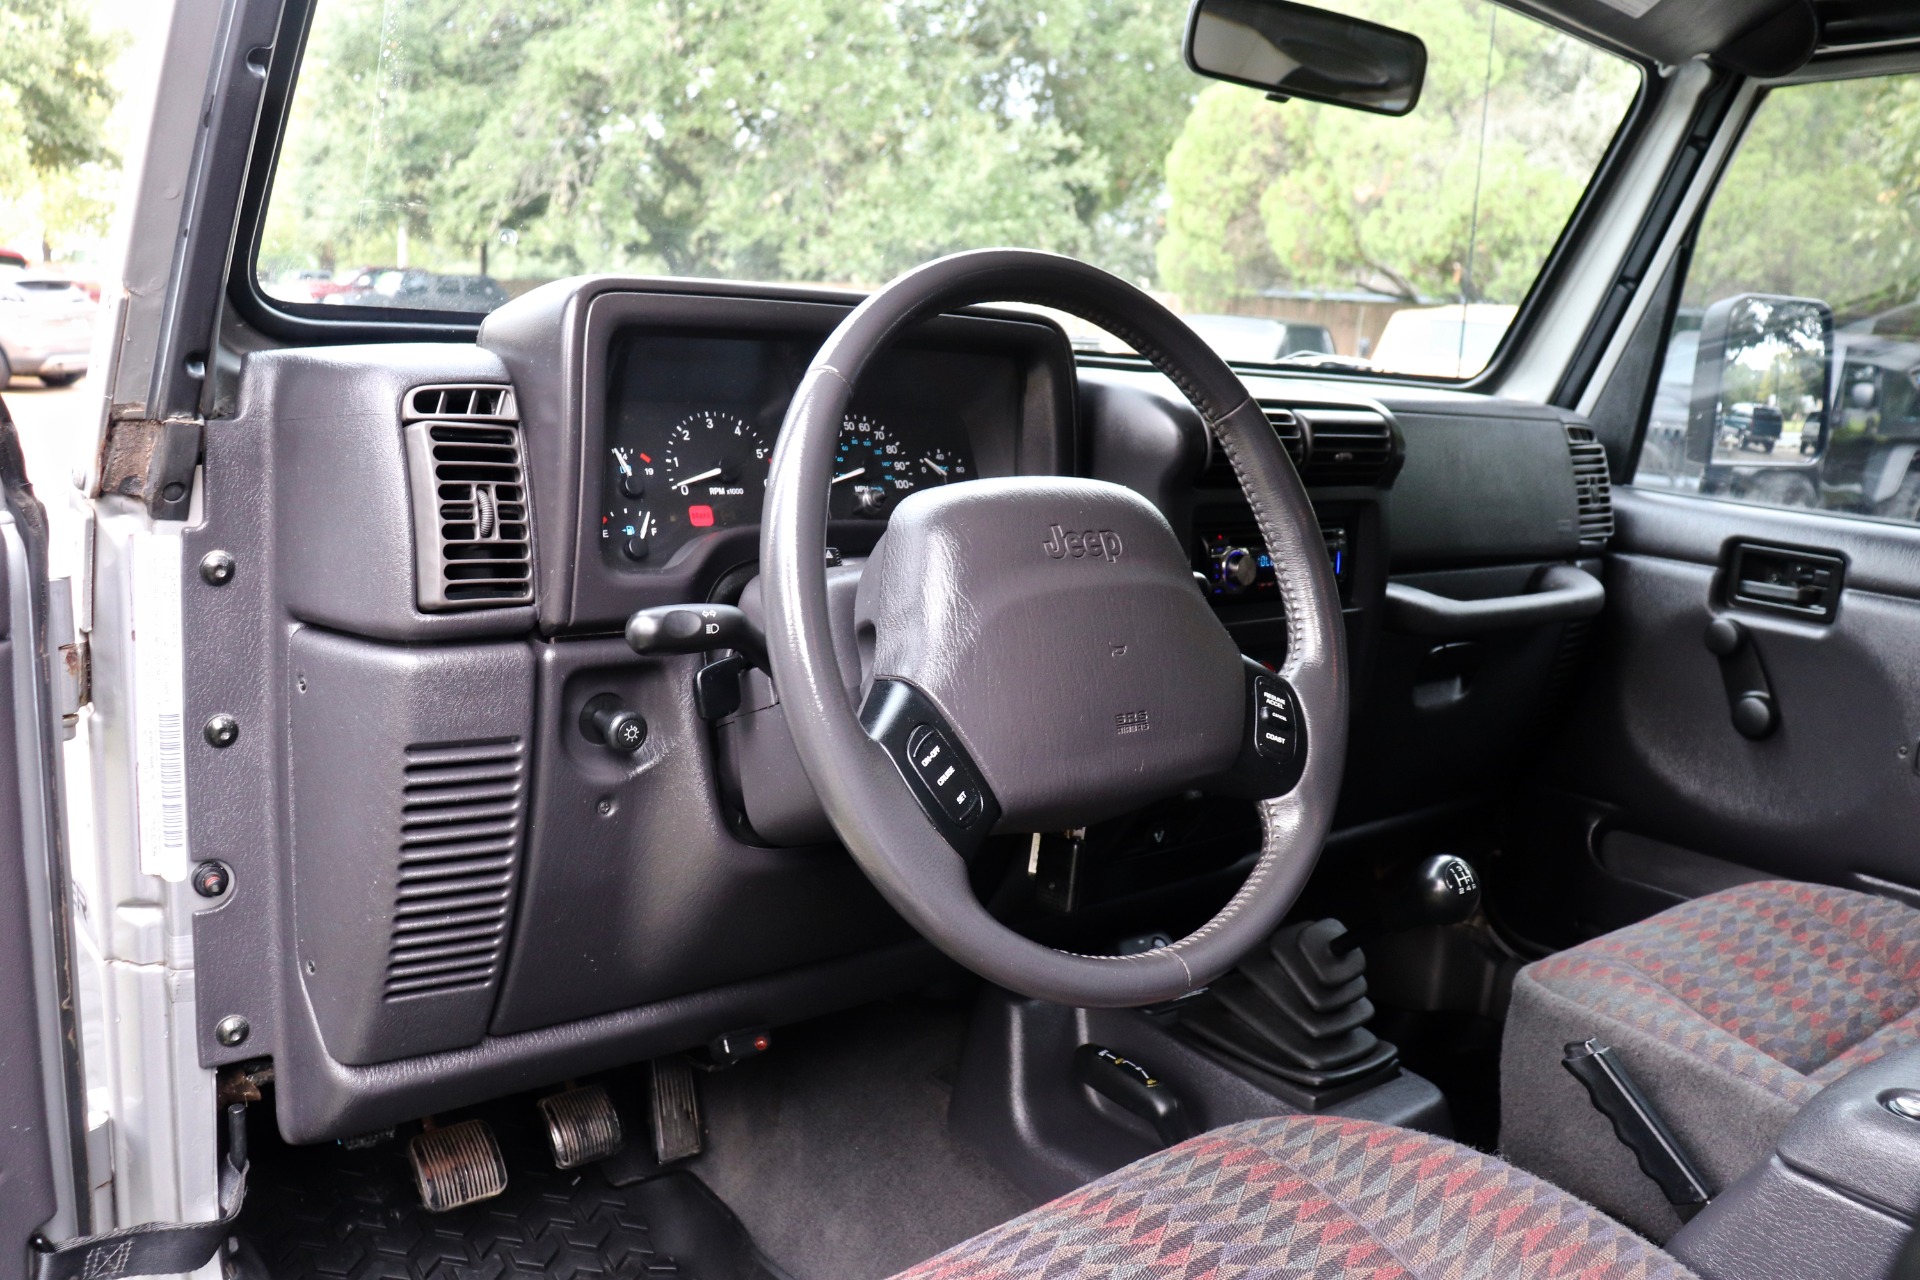 Used 2000 Jeep Wrangler Sport For Sale ($21,995) | Select Jeeps Inc. Stock  #766806